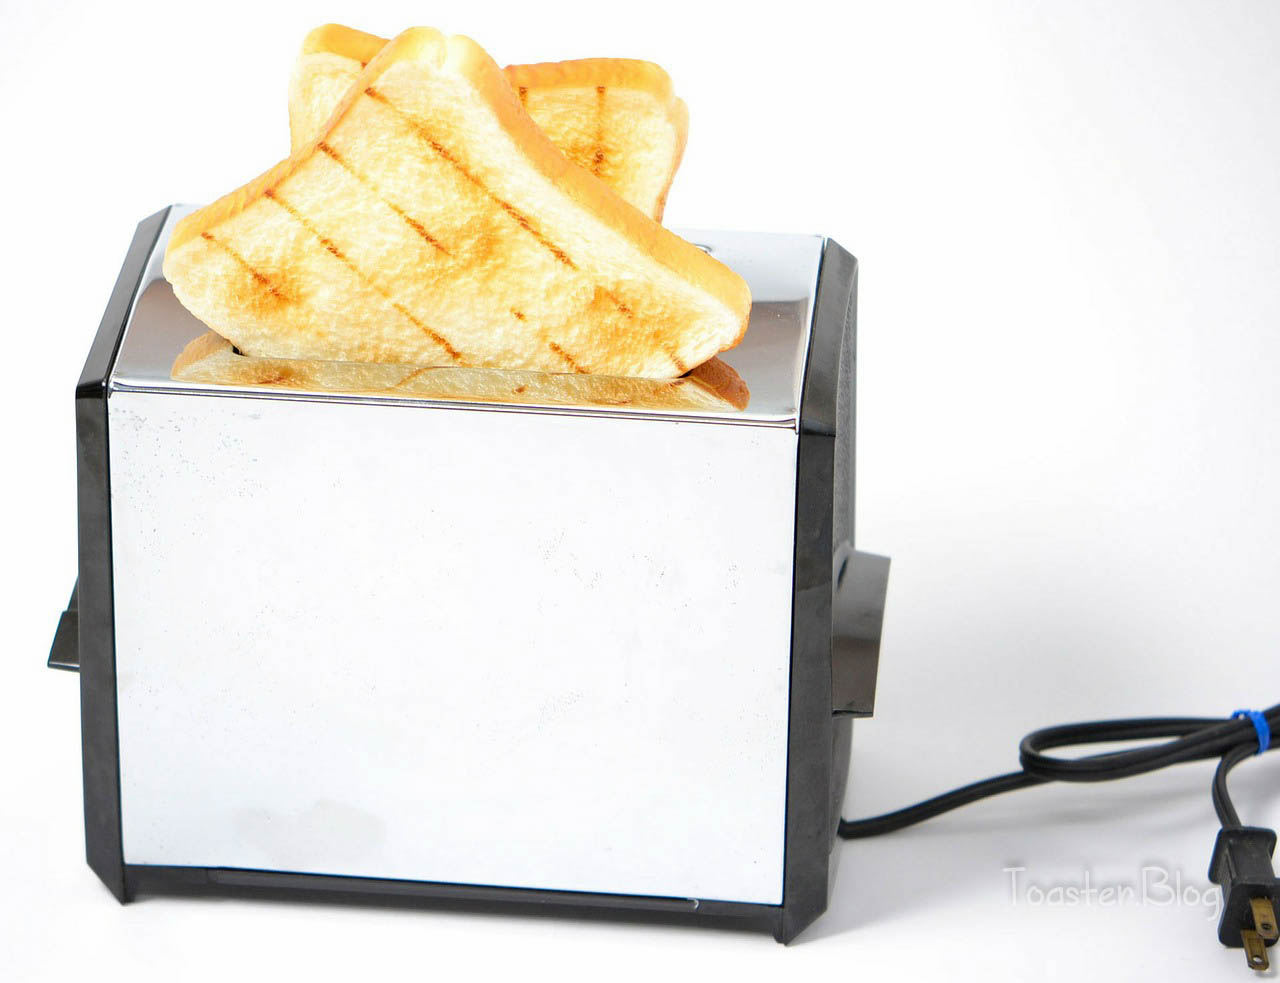 How to use a toaster